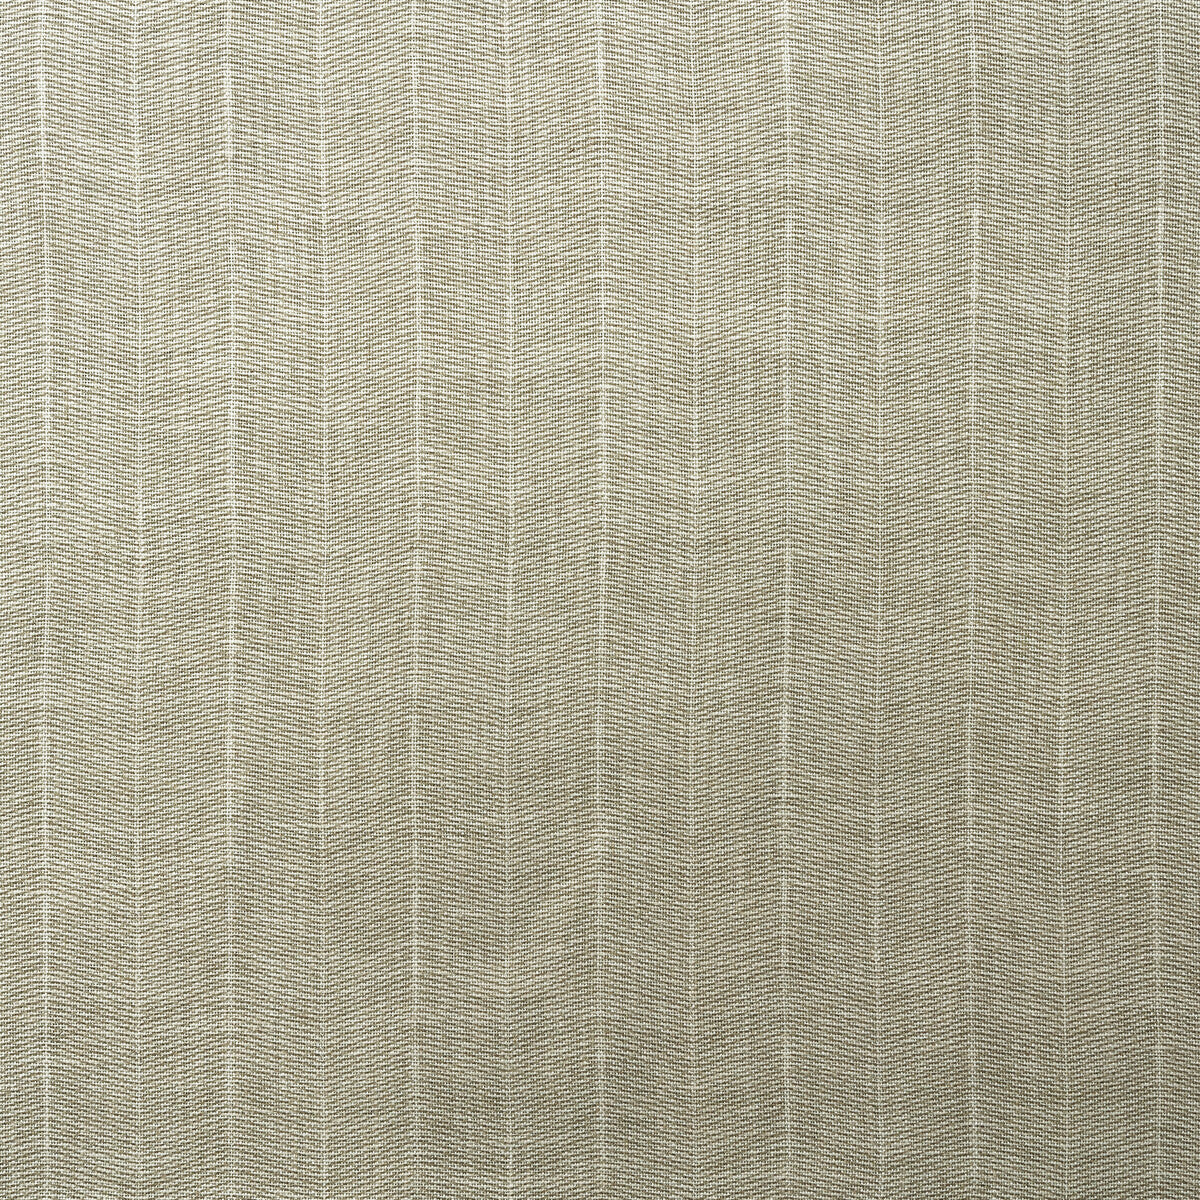 Furrow fabric in stone color - pattern AM100380.106.0 - by Kravet Couture in the Andrew Martin Garden Path collection